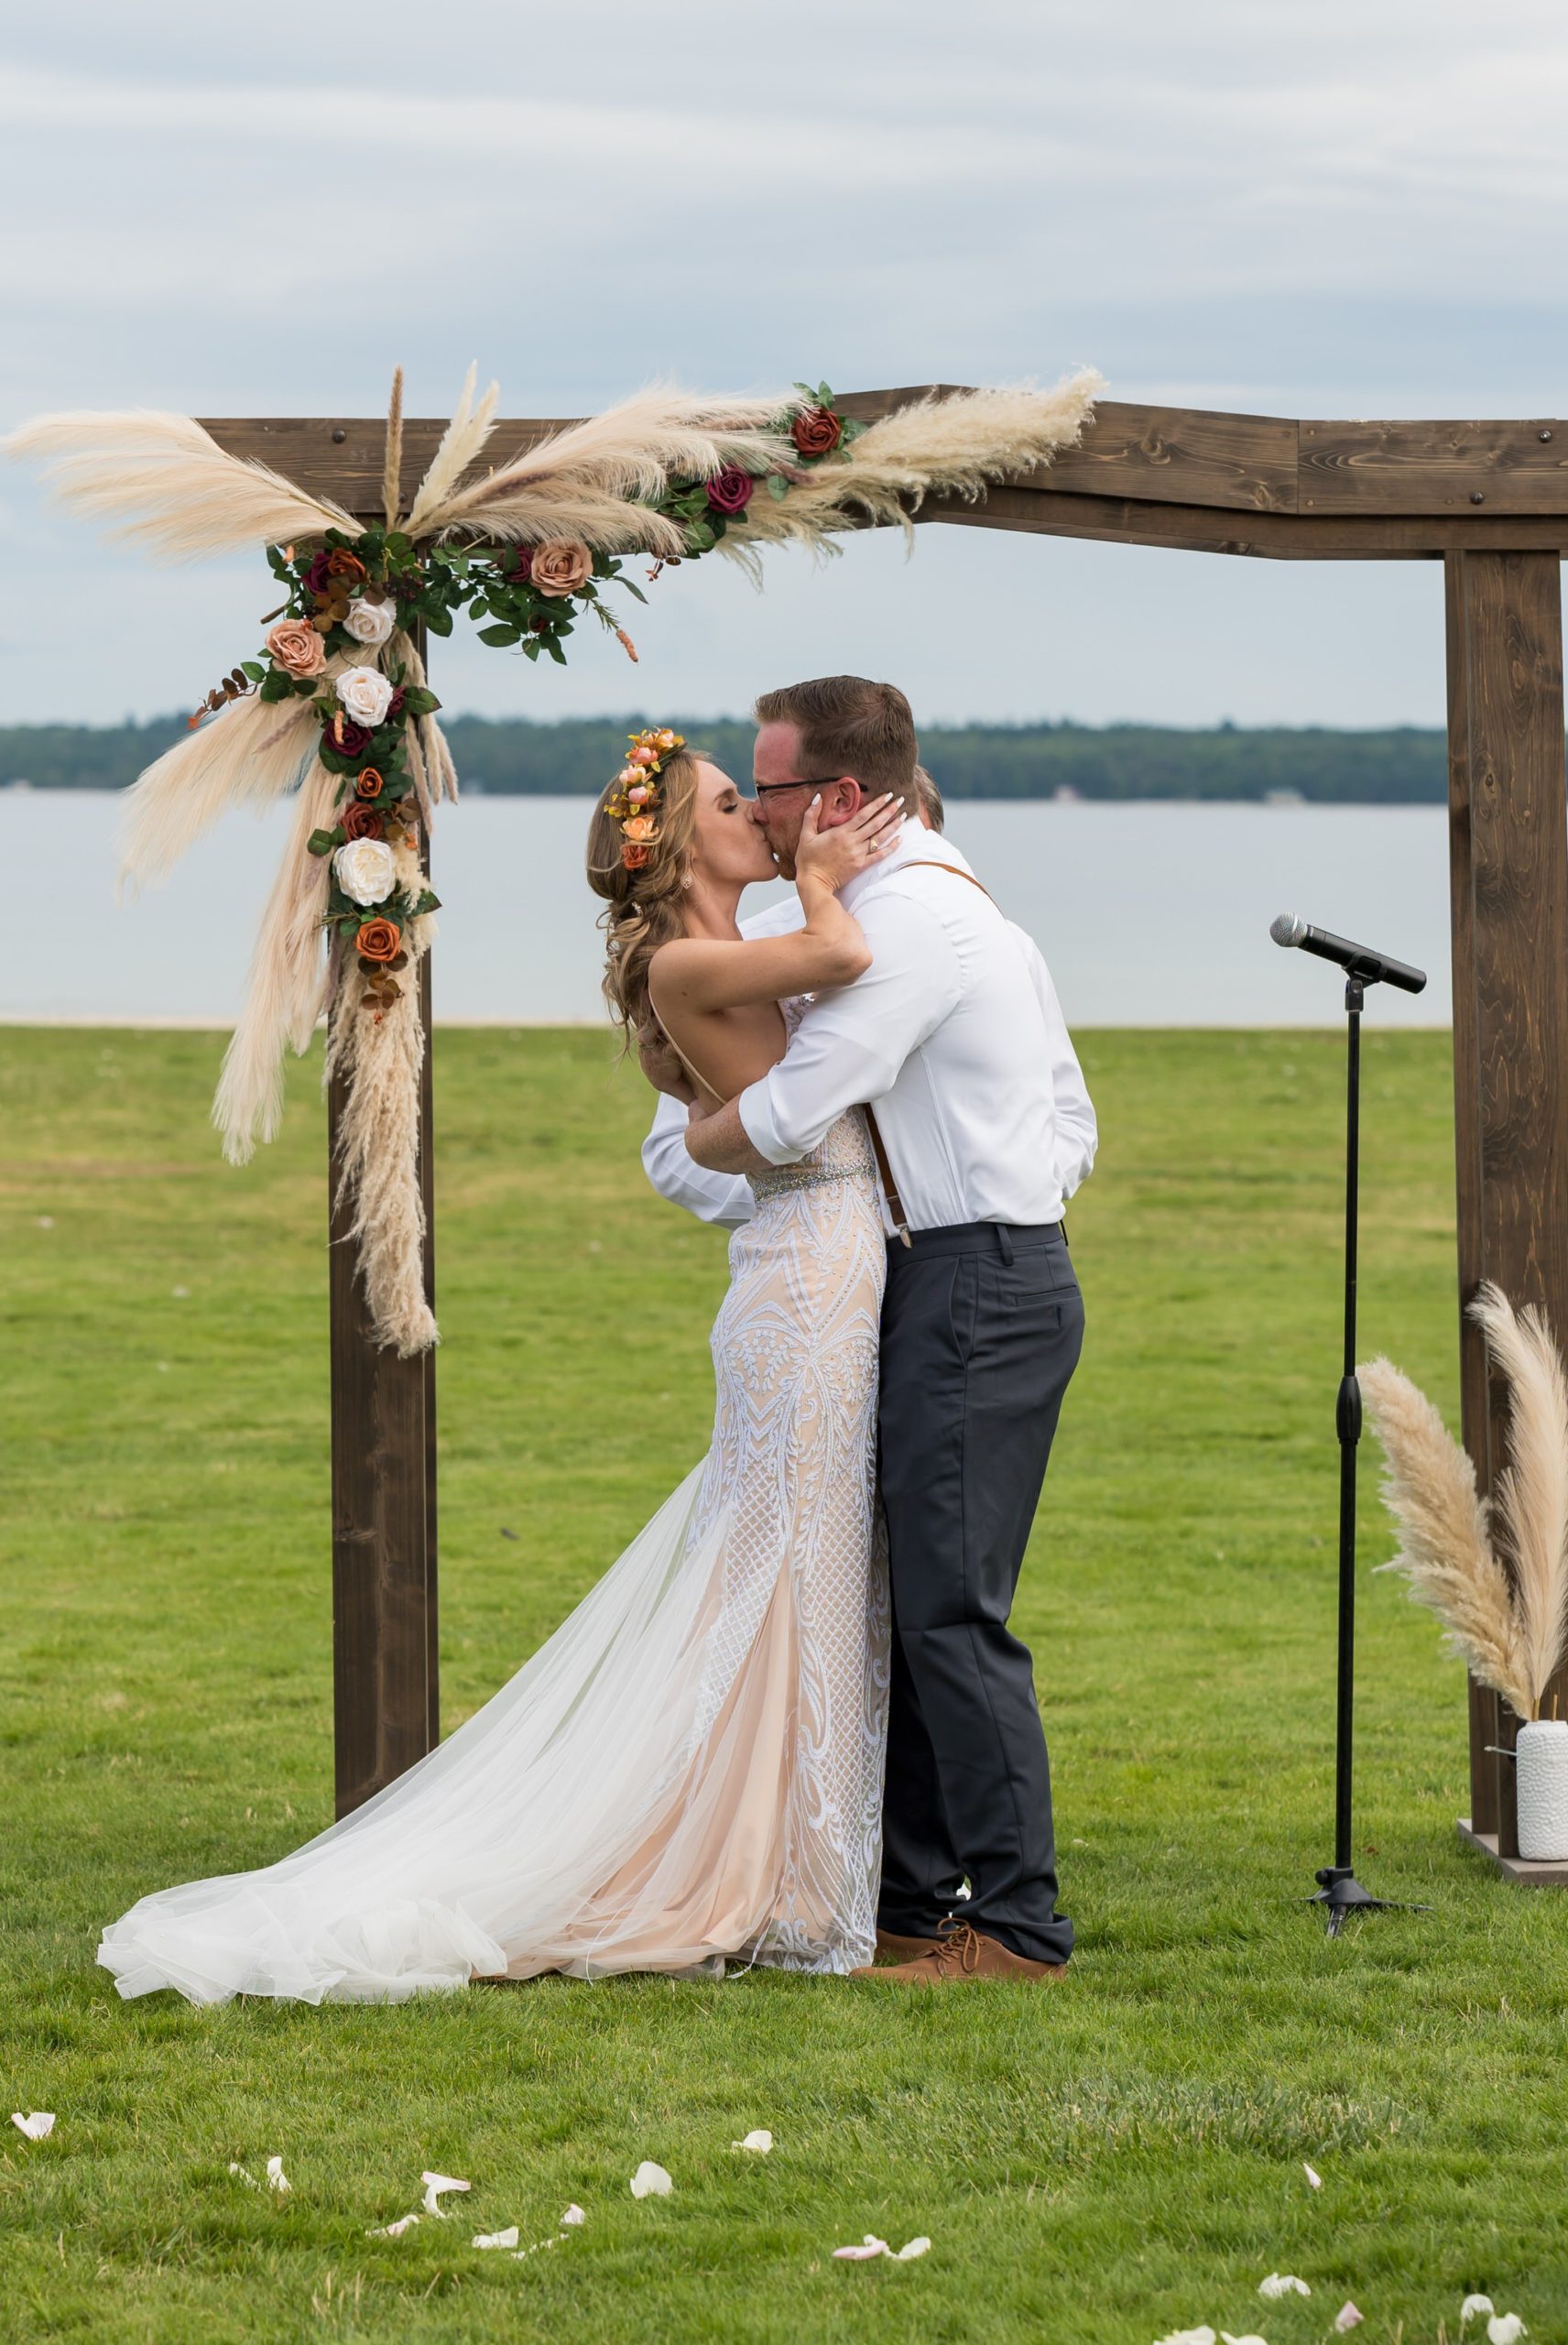 A bride and groom kiss as they are announced as husband and wife during their Mission Point Resort wedding.